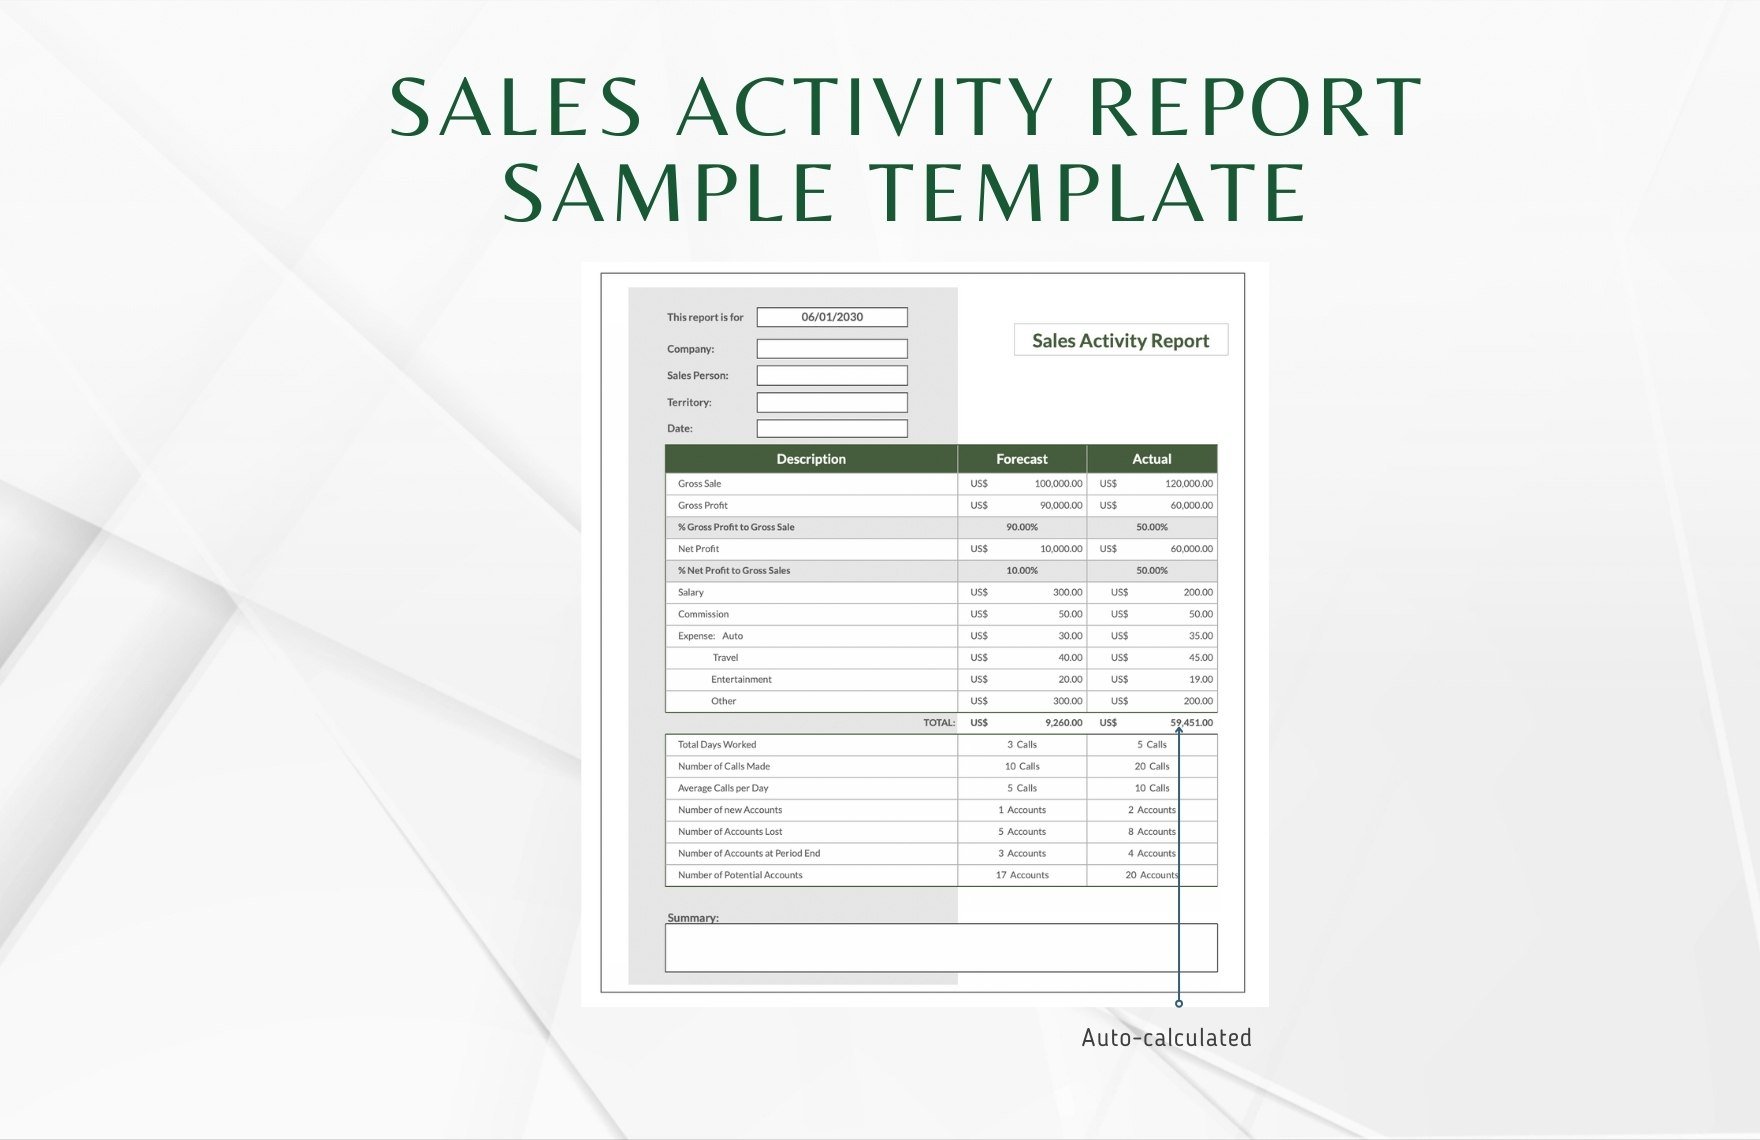 Sales Activity Report Sample Template